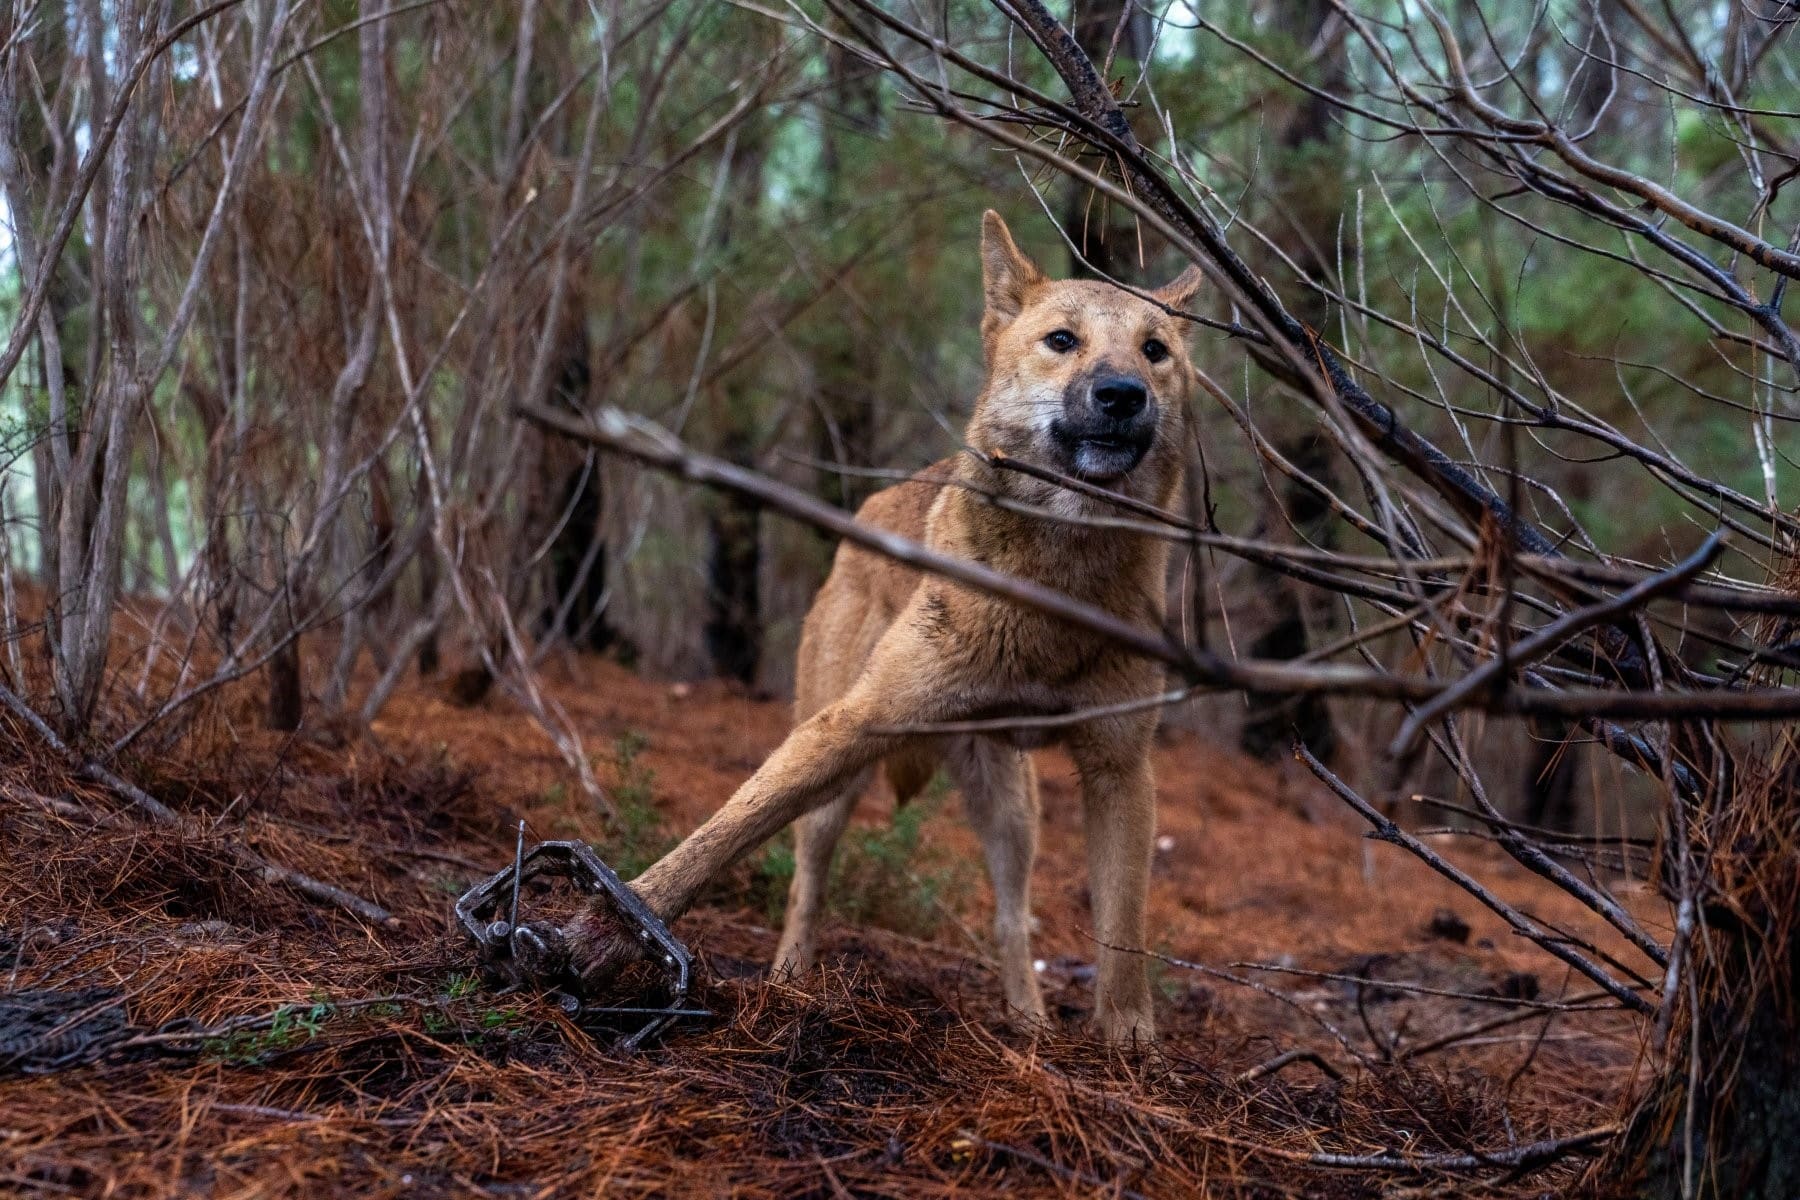 Protect Dingoes in Victoria